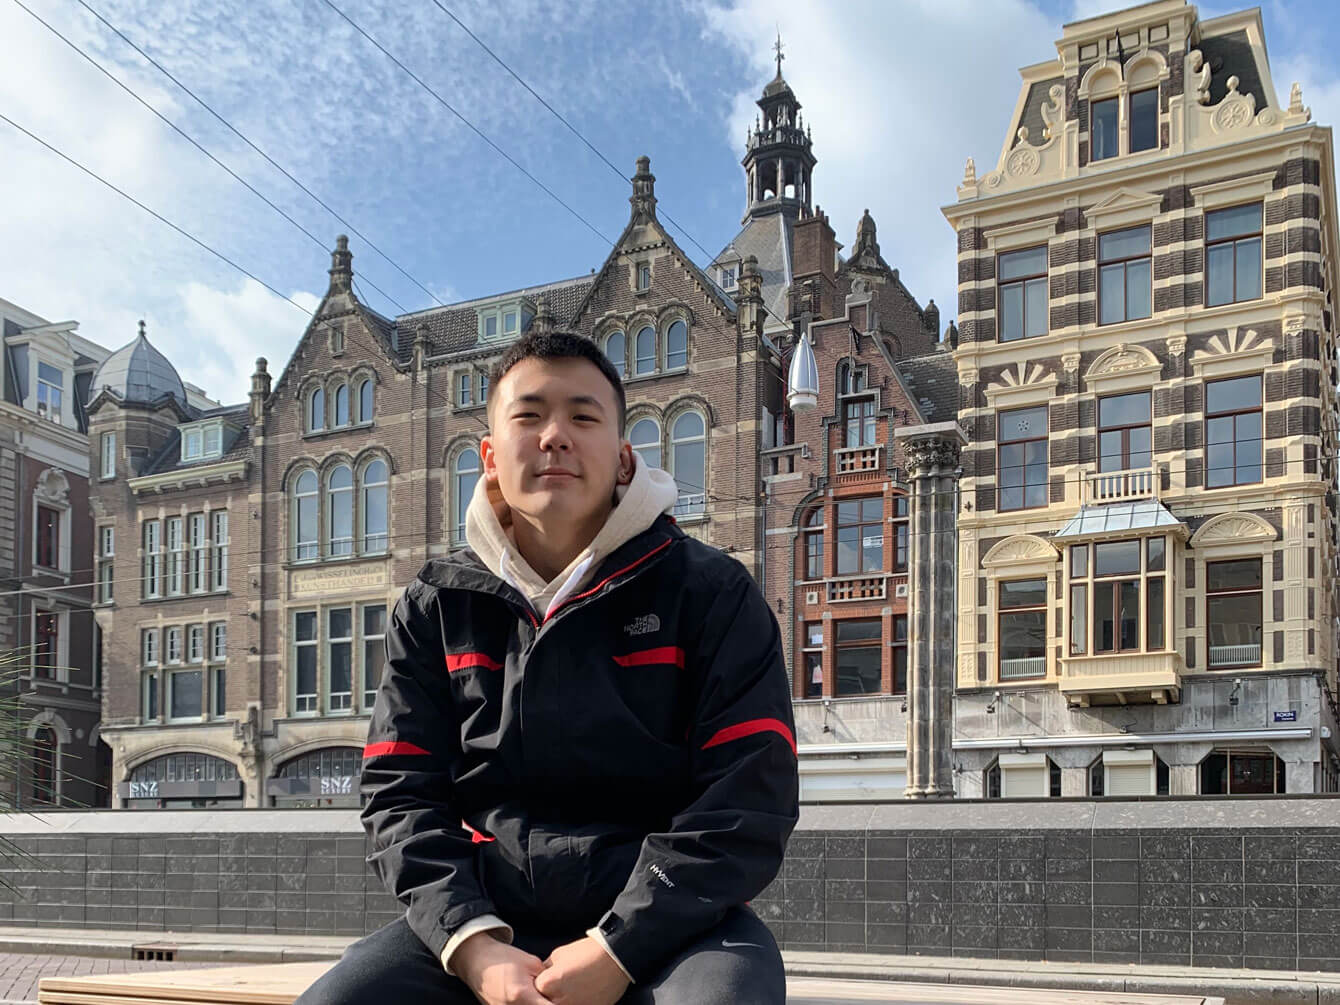 Male student posing for photo in front of buildings while studying abroad.